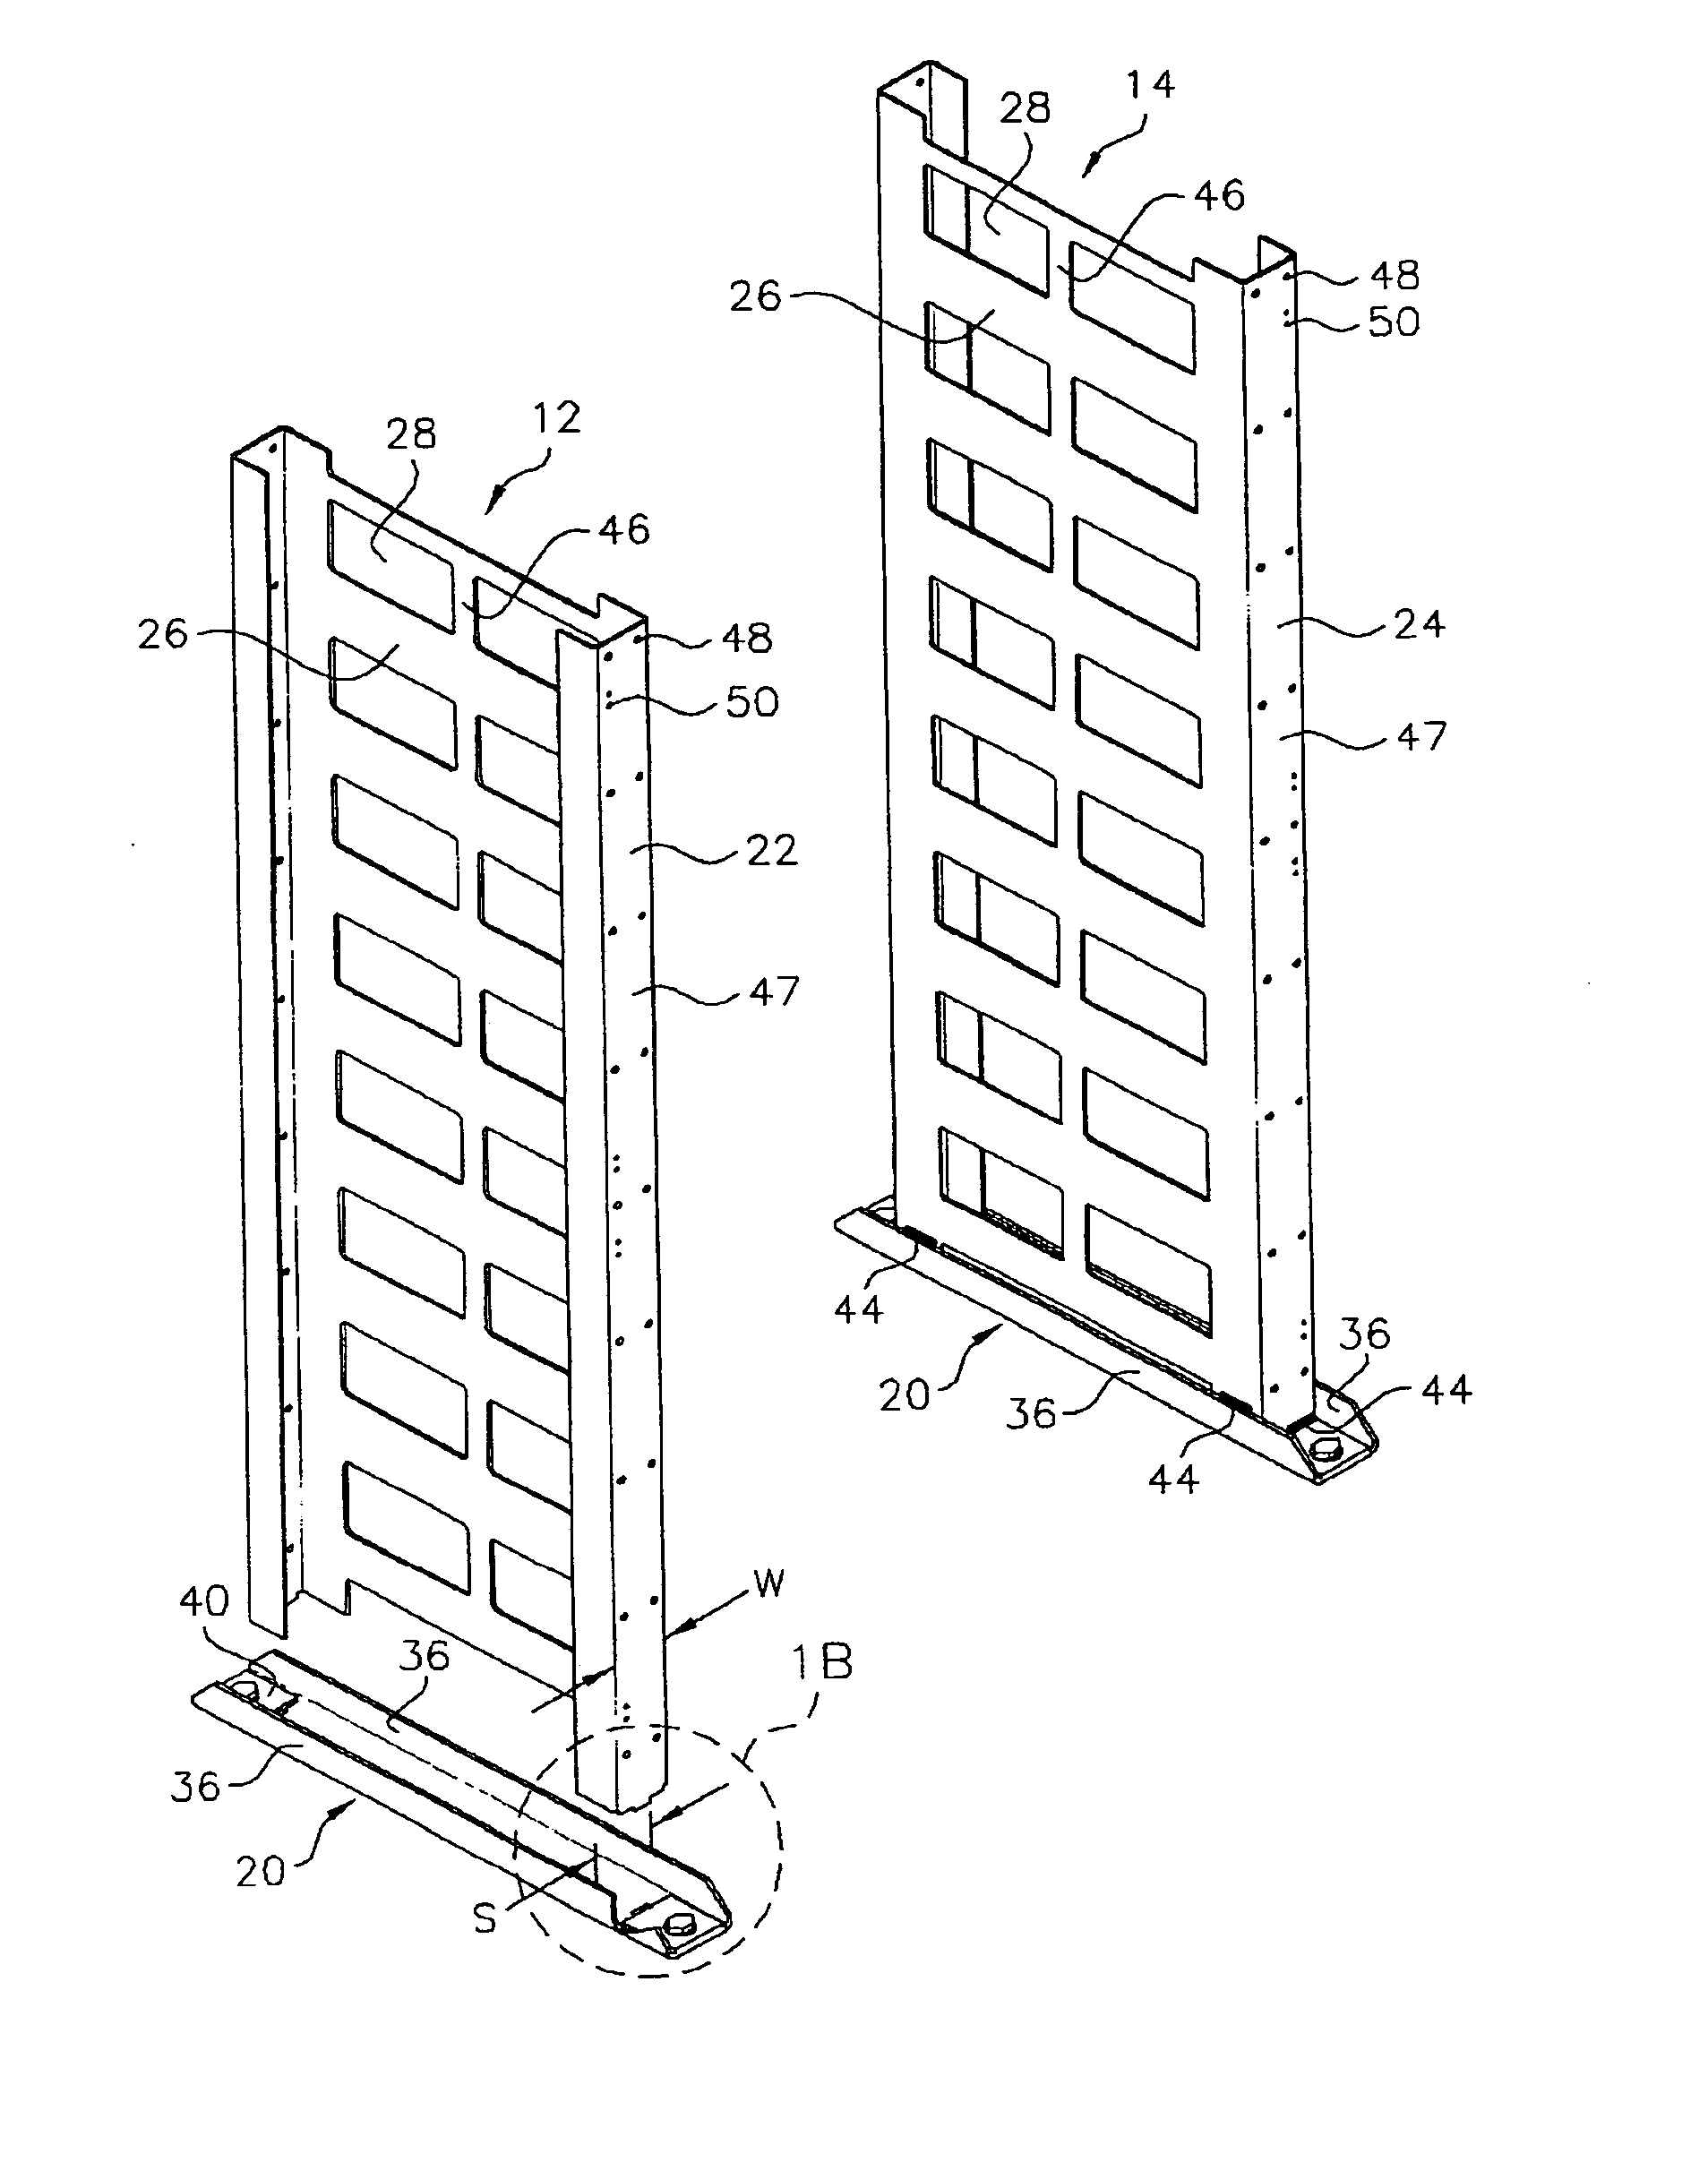 Battery rack and system